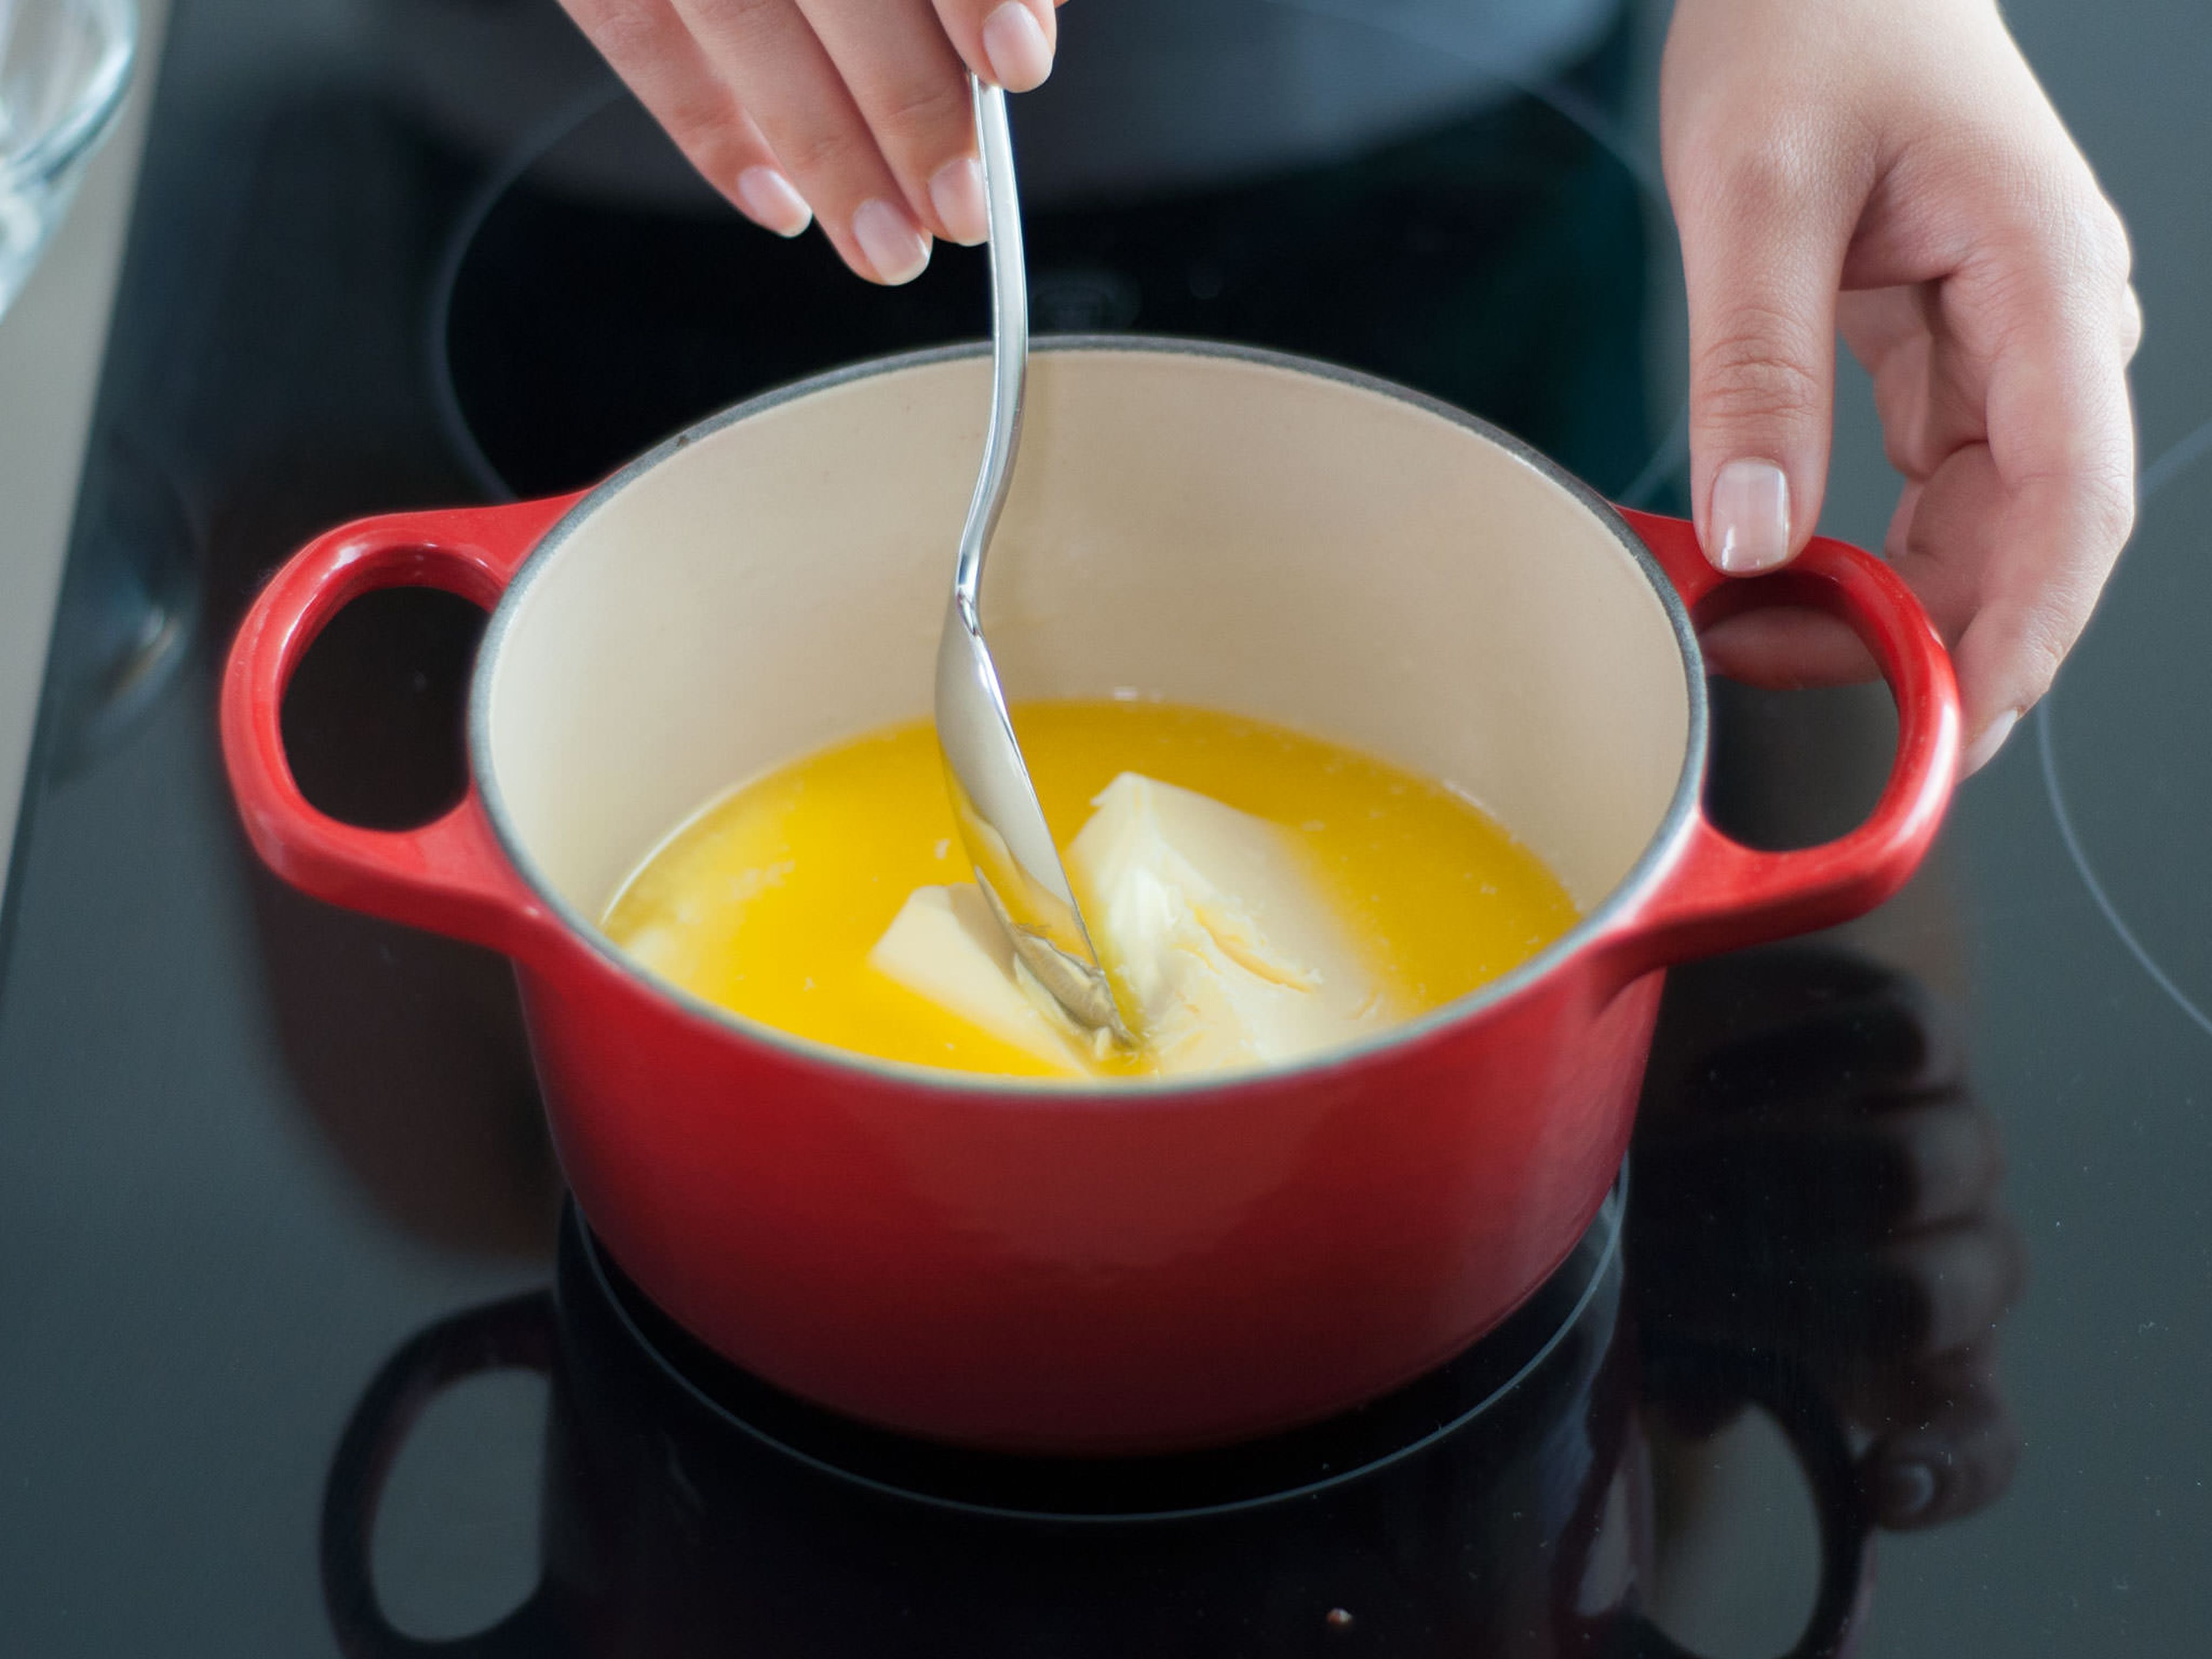 In a small saucepan, melt butter over low heat. Once it is molten and at a lukewarm temperature, carefully beat into batter.